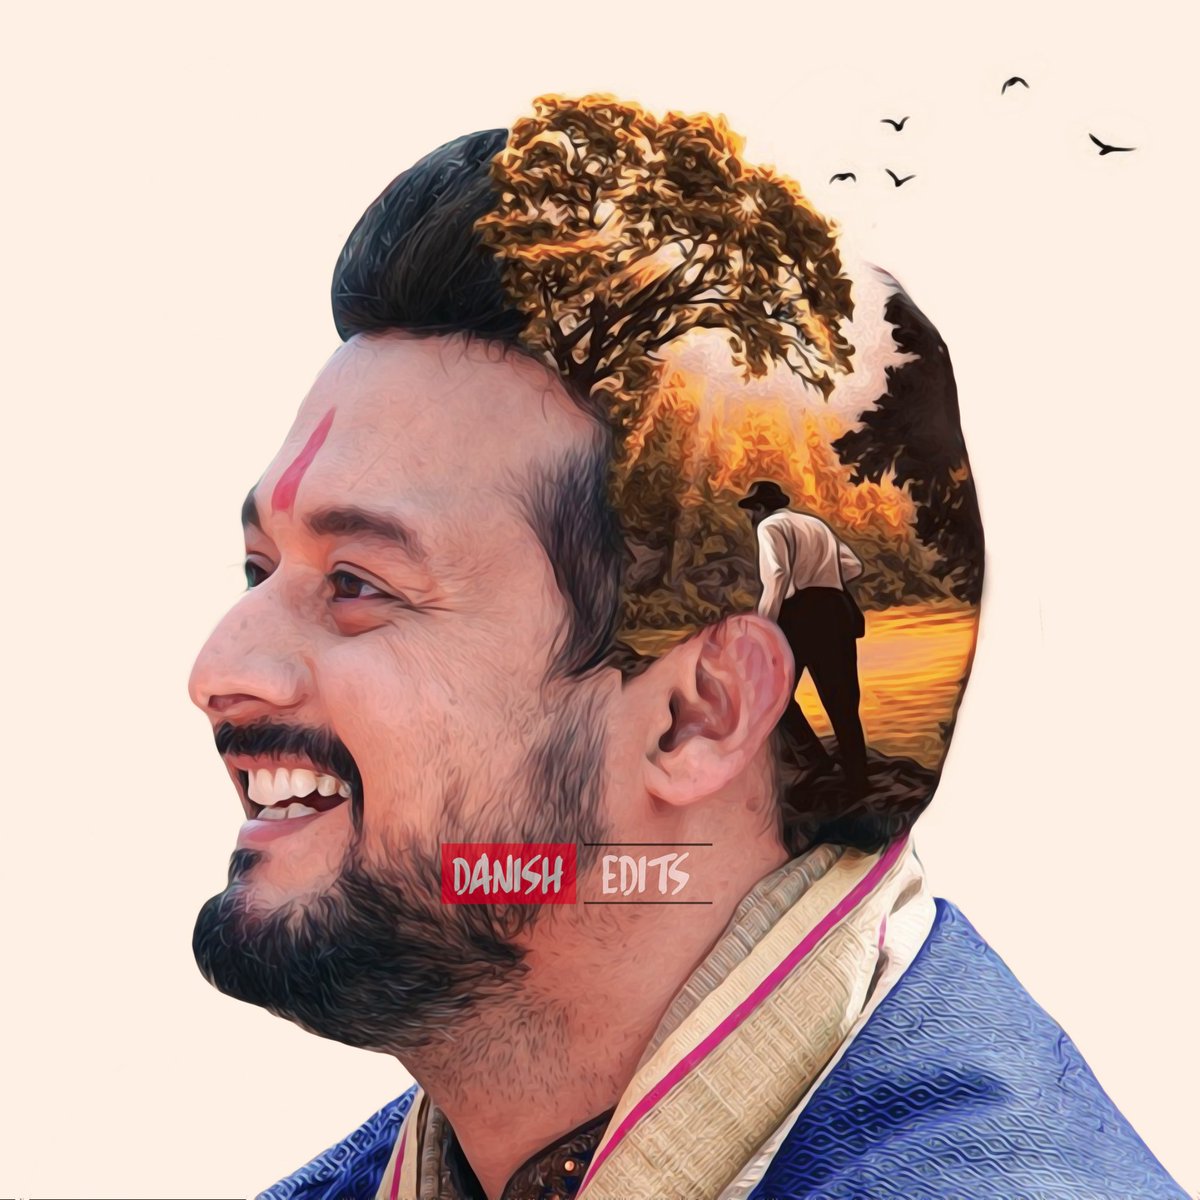 The world is a canvas for your imagination.
You are the painter.
There are NO RULES.
Get to work..!! 
@swwapniljoshi 🥰🥰
#LifeOfImagination #SundayMotivation #Love4SJ

@DaniishShaikh
#DsKaEdit | #DEdit | #Superstar | #DanishFC